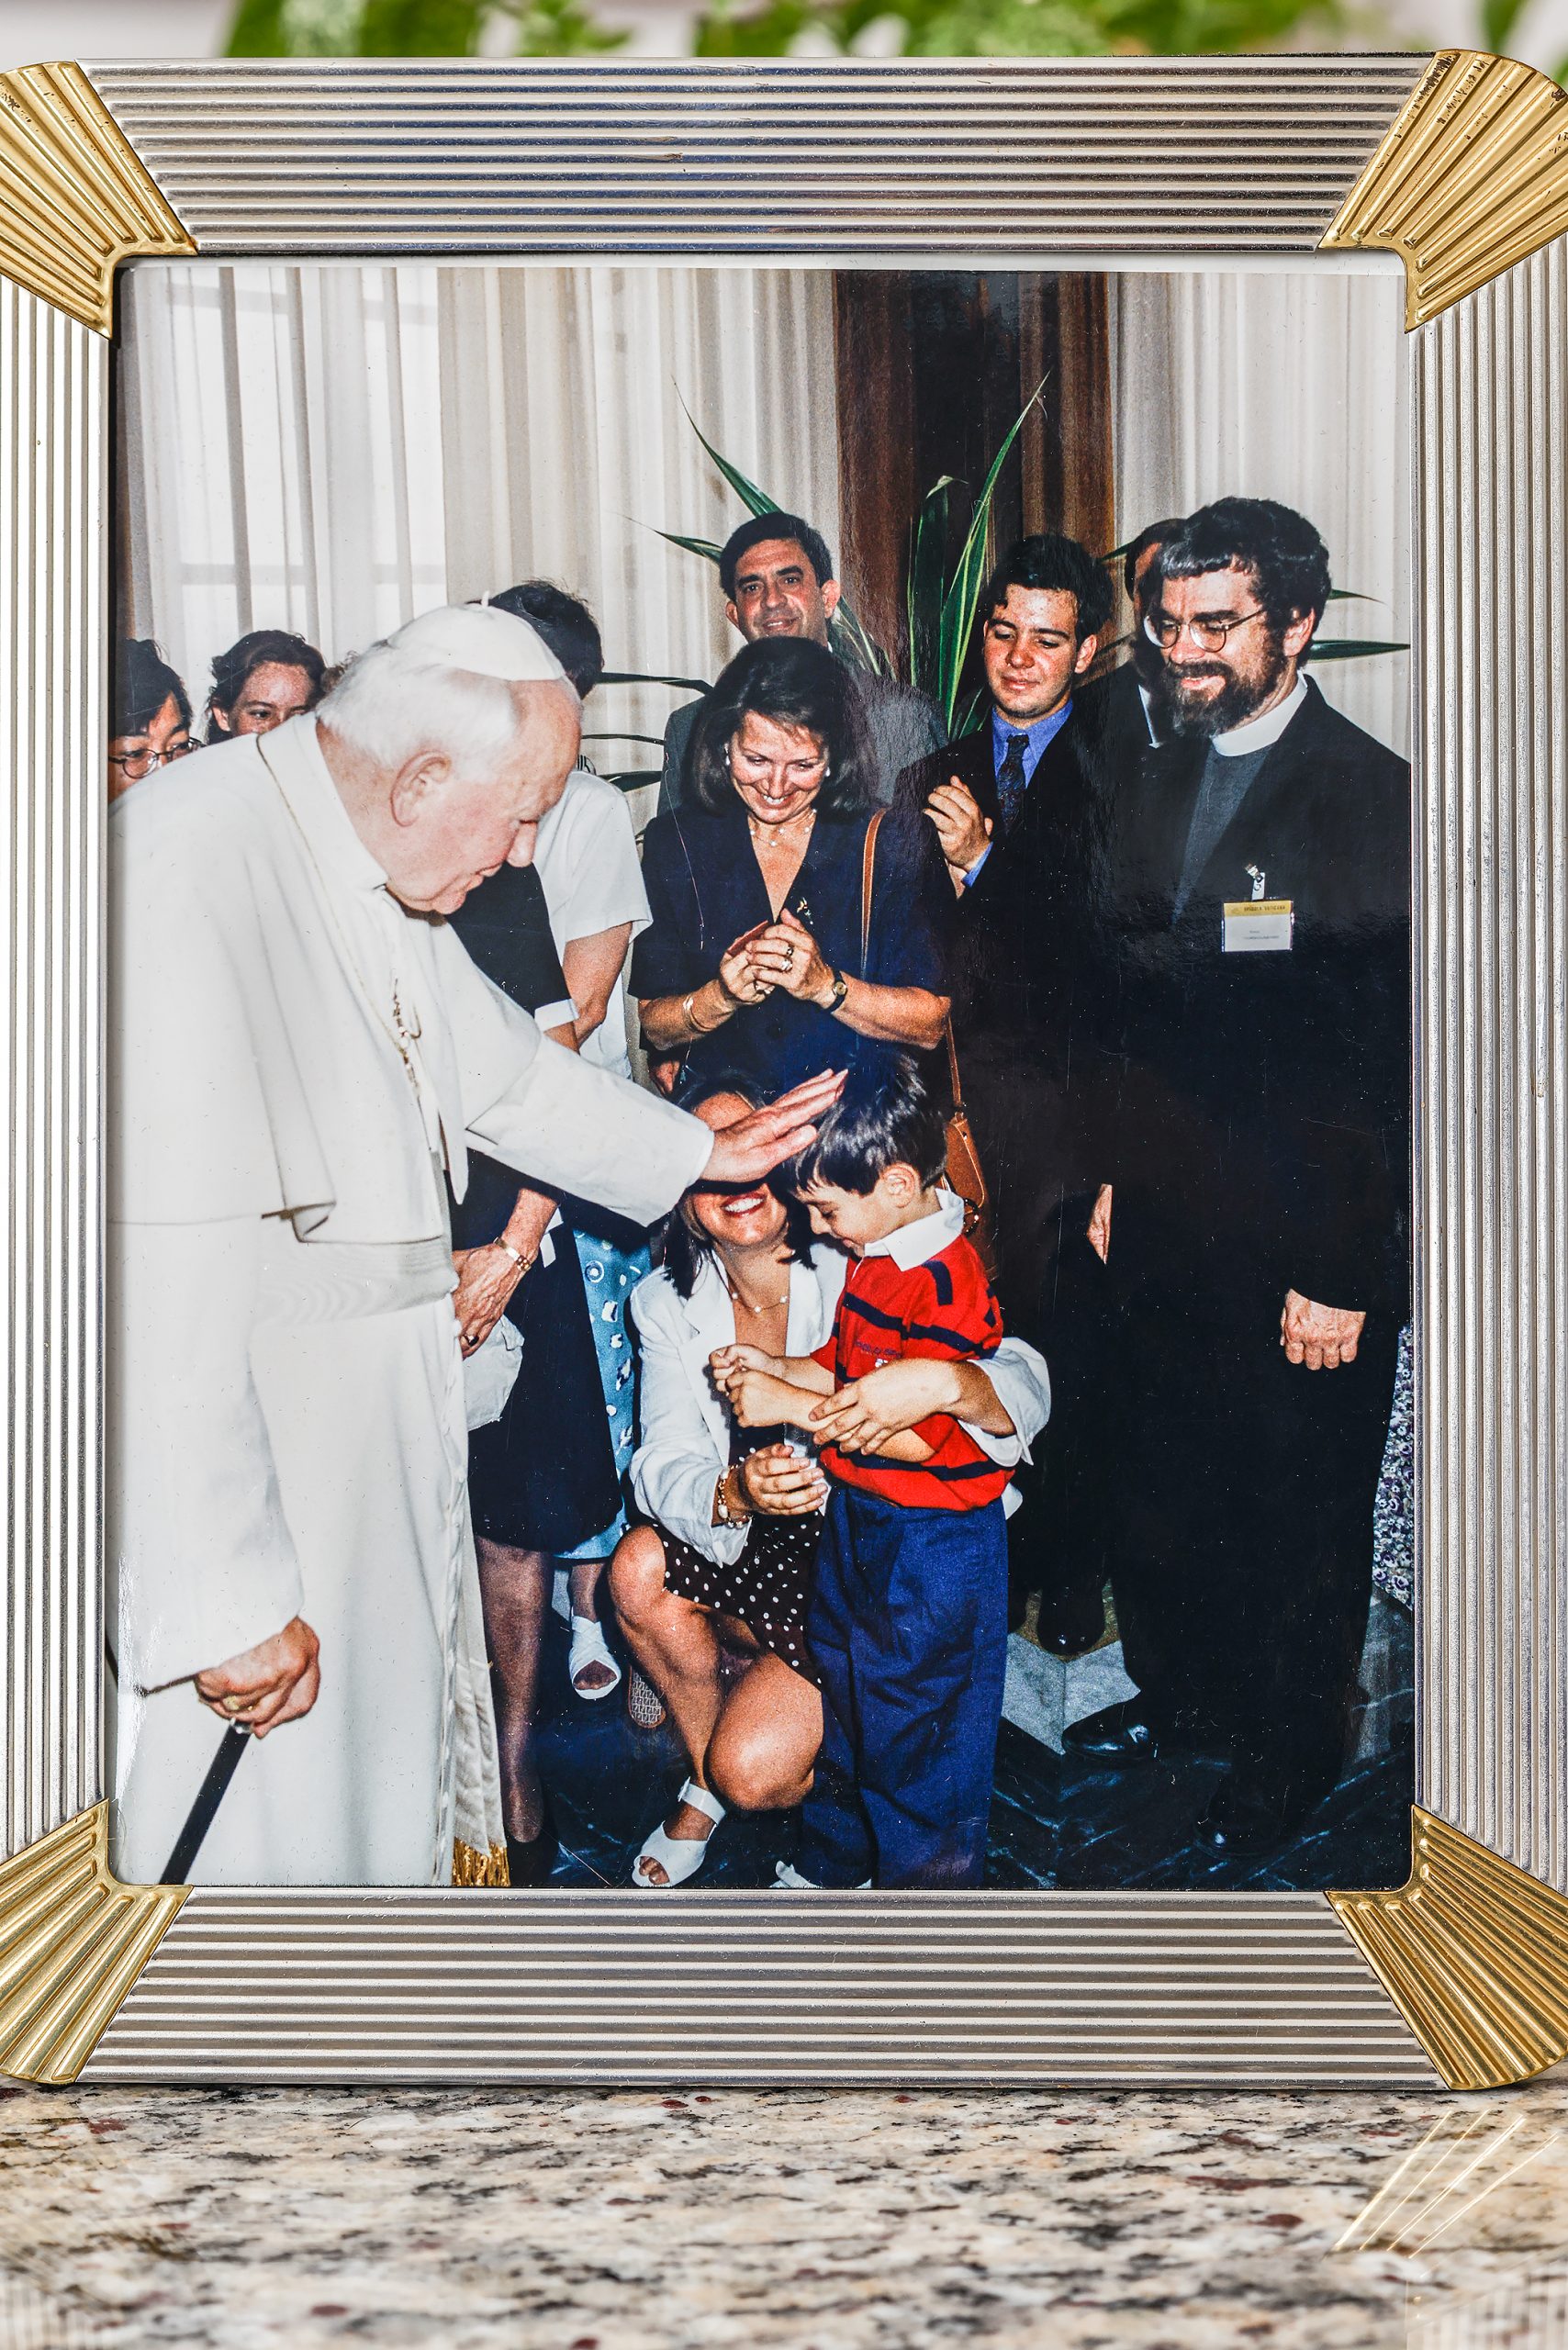  Pope John Paul II blesses their youngest son, Francesco, at 8 years old. Eligio was on the board for the Vatican Observatory, an astronomical research and educational institution supported by the Holy See, and the board had been invited for a special audience with the pope. The Maolis were the only lay people as everyone else was either a nun or a priest. John Paul II was known for walking away from the adults in a gathering to seek out children. Paola says that as soon as he saw Francesco, the only child in attendance, he zeroed in on him and gave him his blessing. 